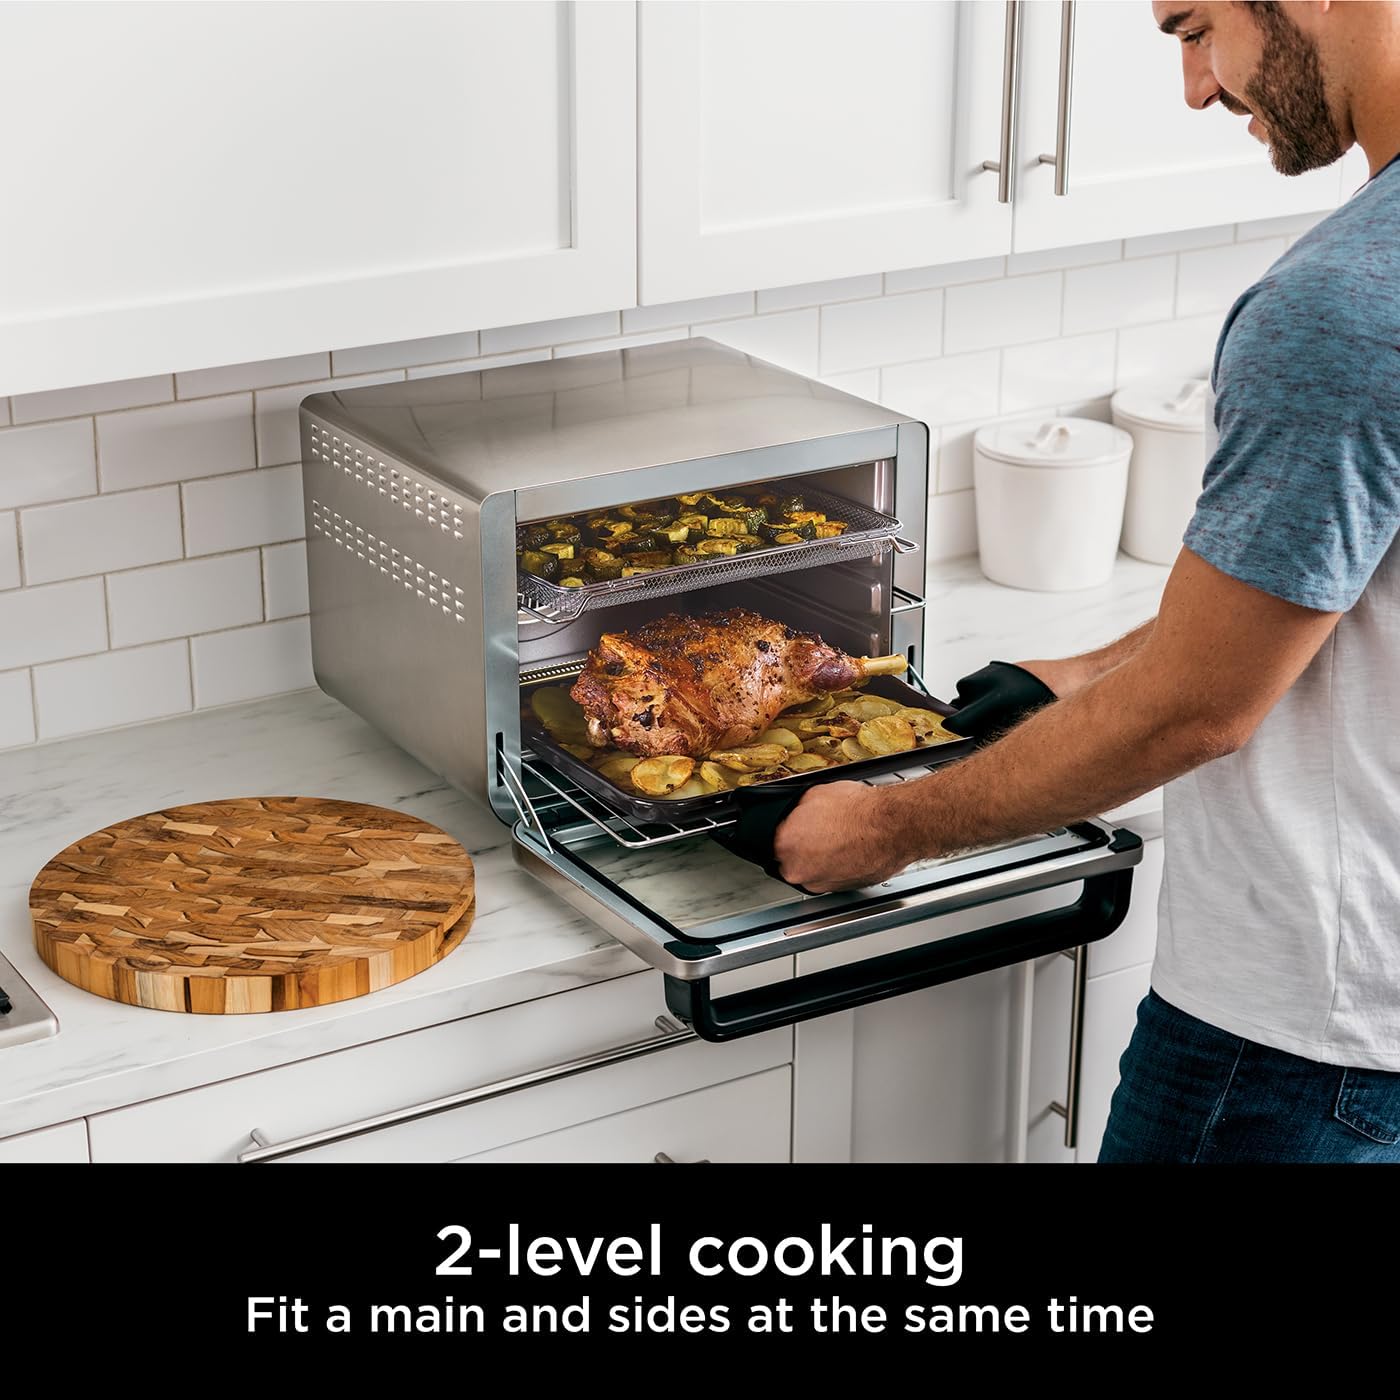 Ninja Foodi 10 - in - 1 Multifunction Oven, Fast Mini Oven, Countertop Oven, 10 Cooking Functions, Air Fry, Pizza, Grill, Roast, Bake, Toast, Bagel & more, Make Family - Size Meals, Silver/Black DT200UK - Amazing Gadgets Outlet